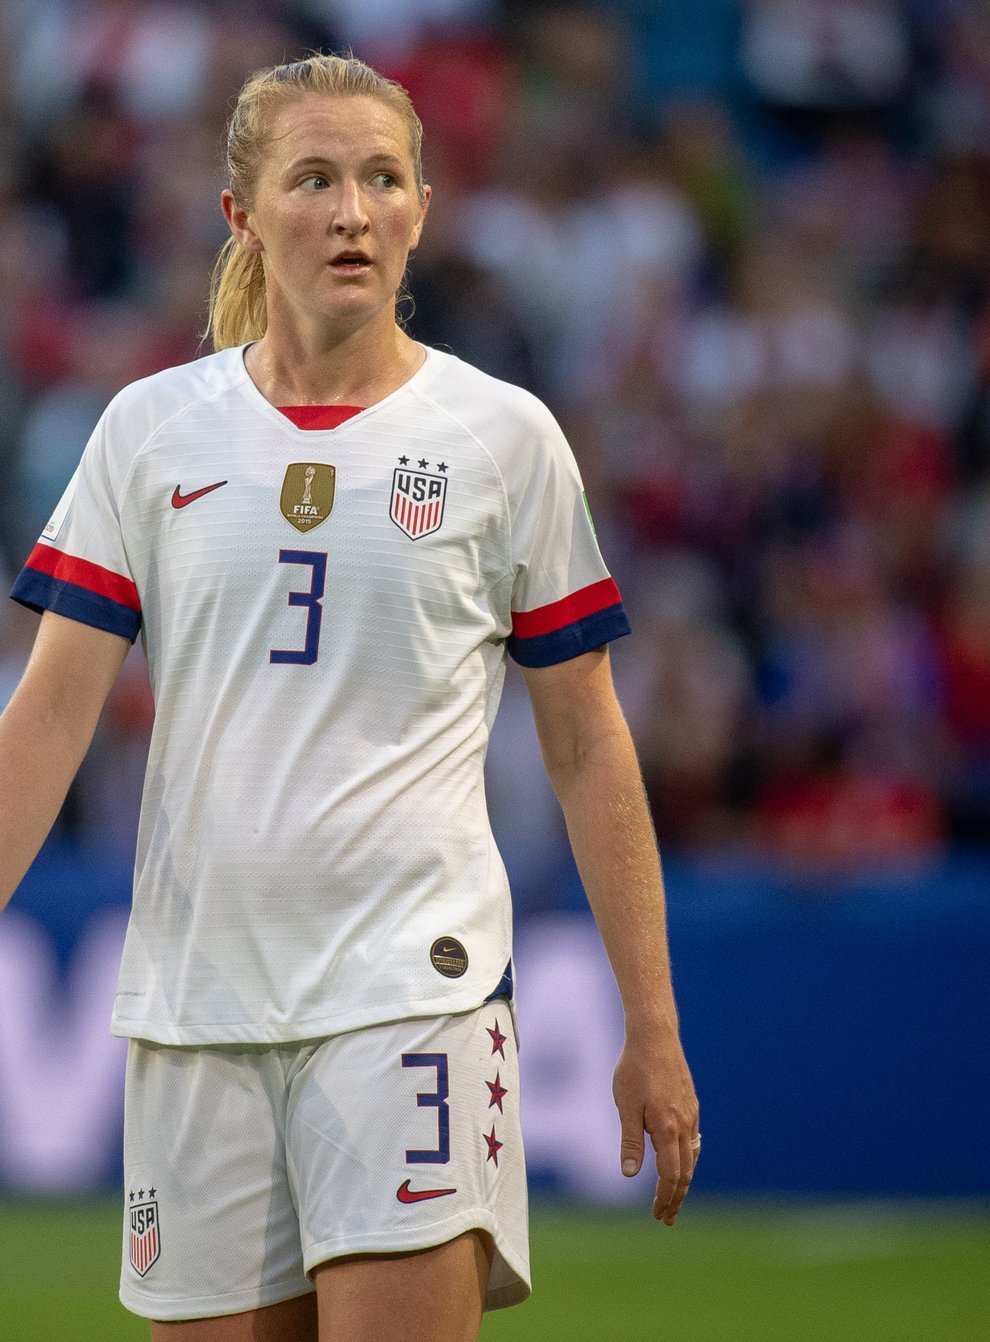 Mewis is excited about the upcoming WSL season